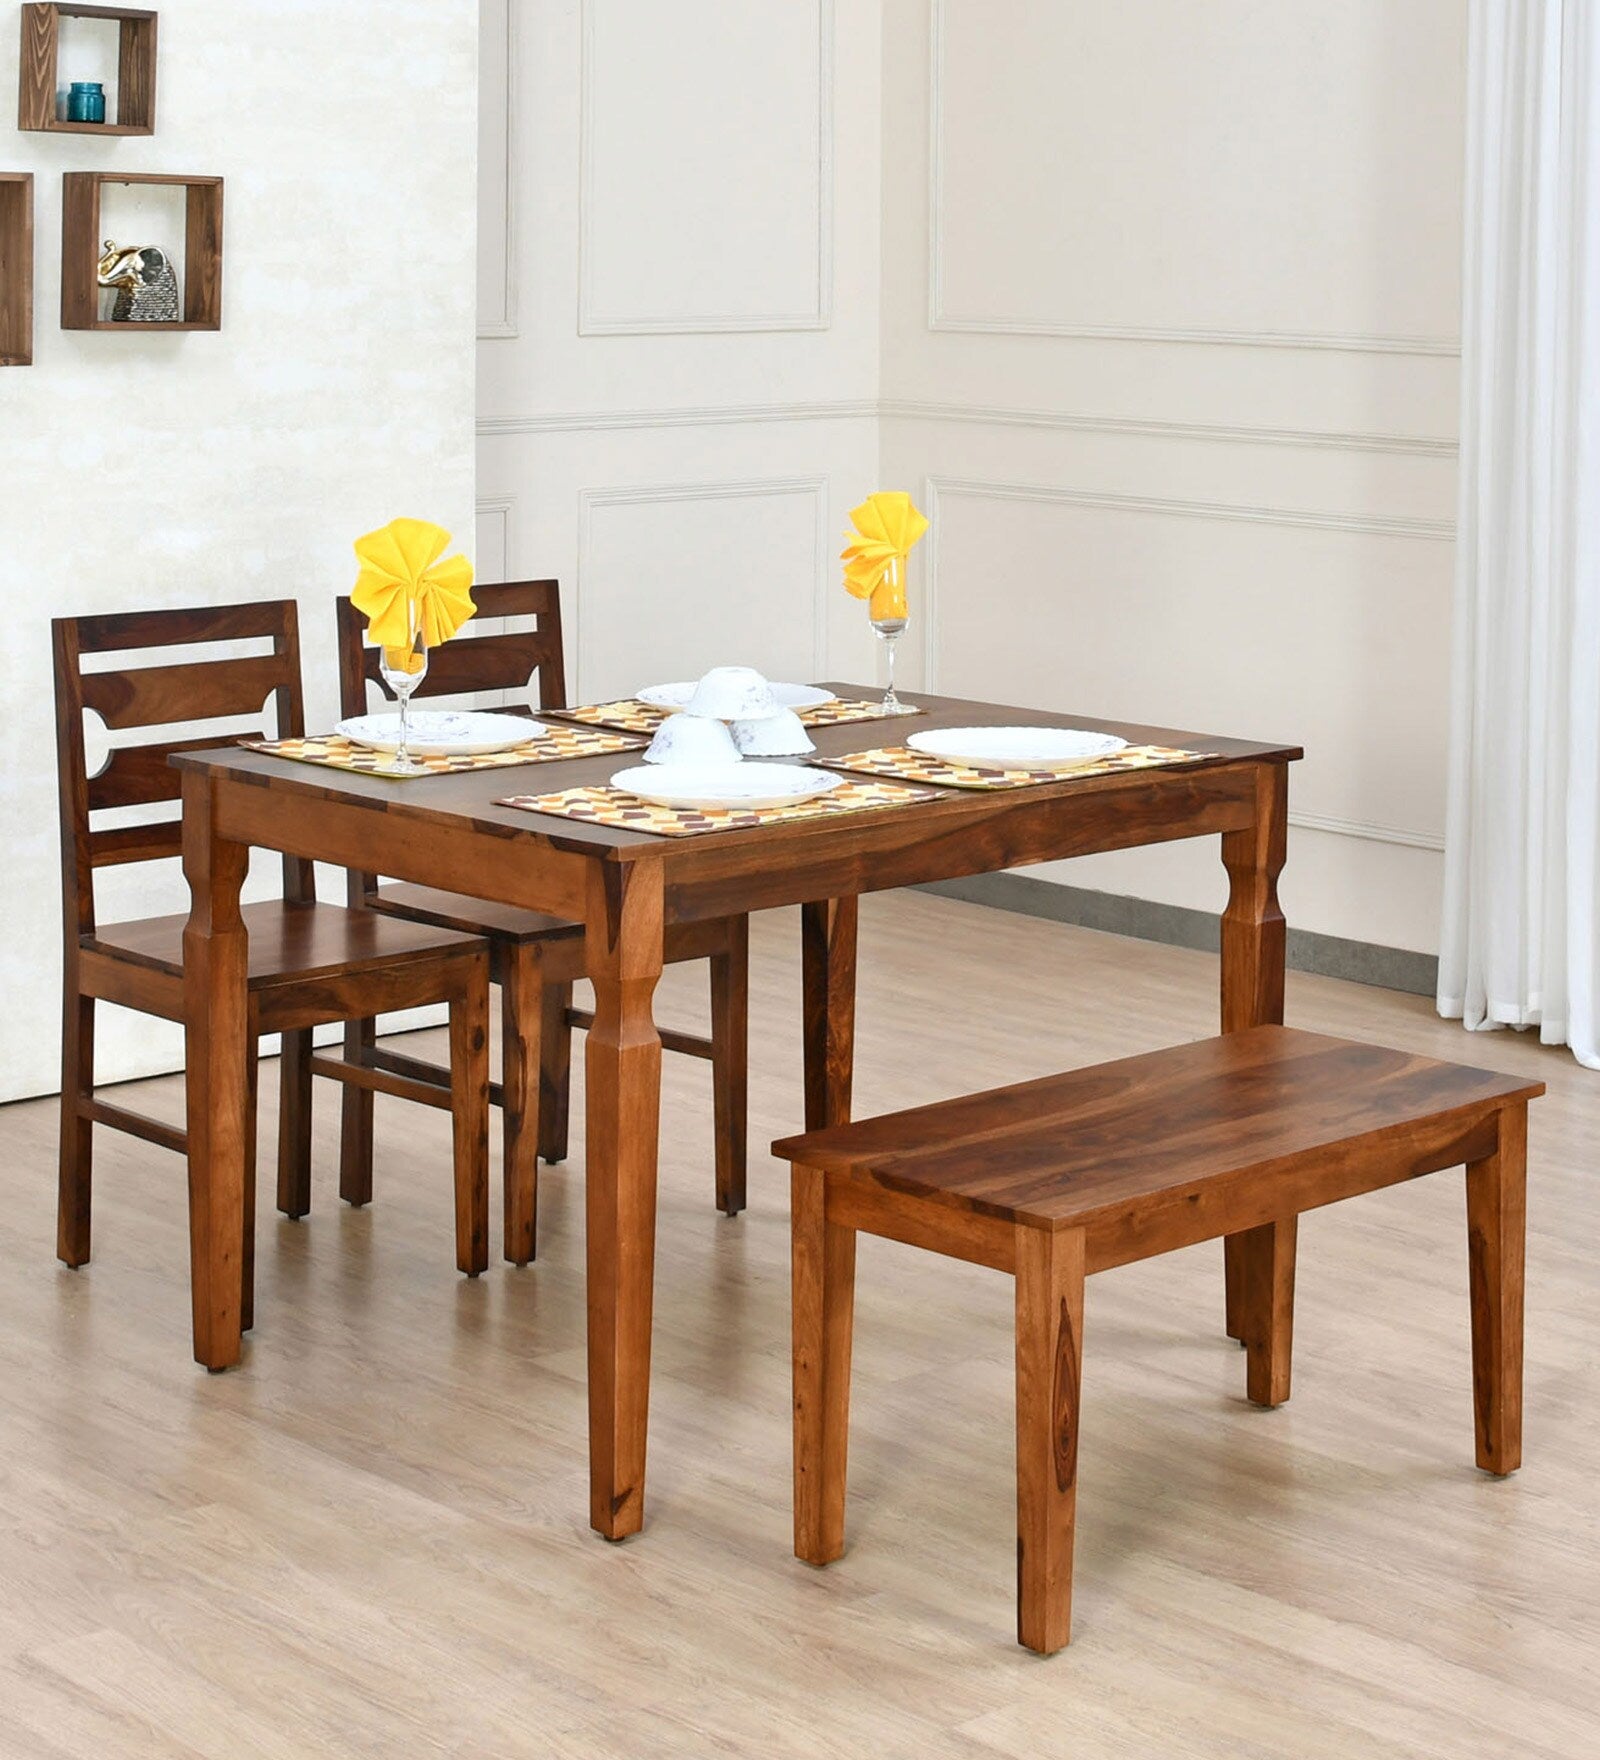 Sheesham Wood 4 Seater Dining Set in Walnut Finish with Bench